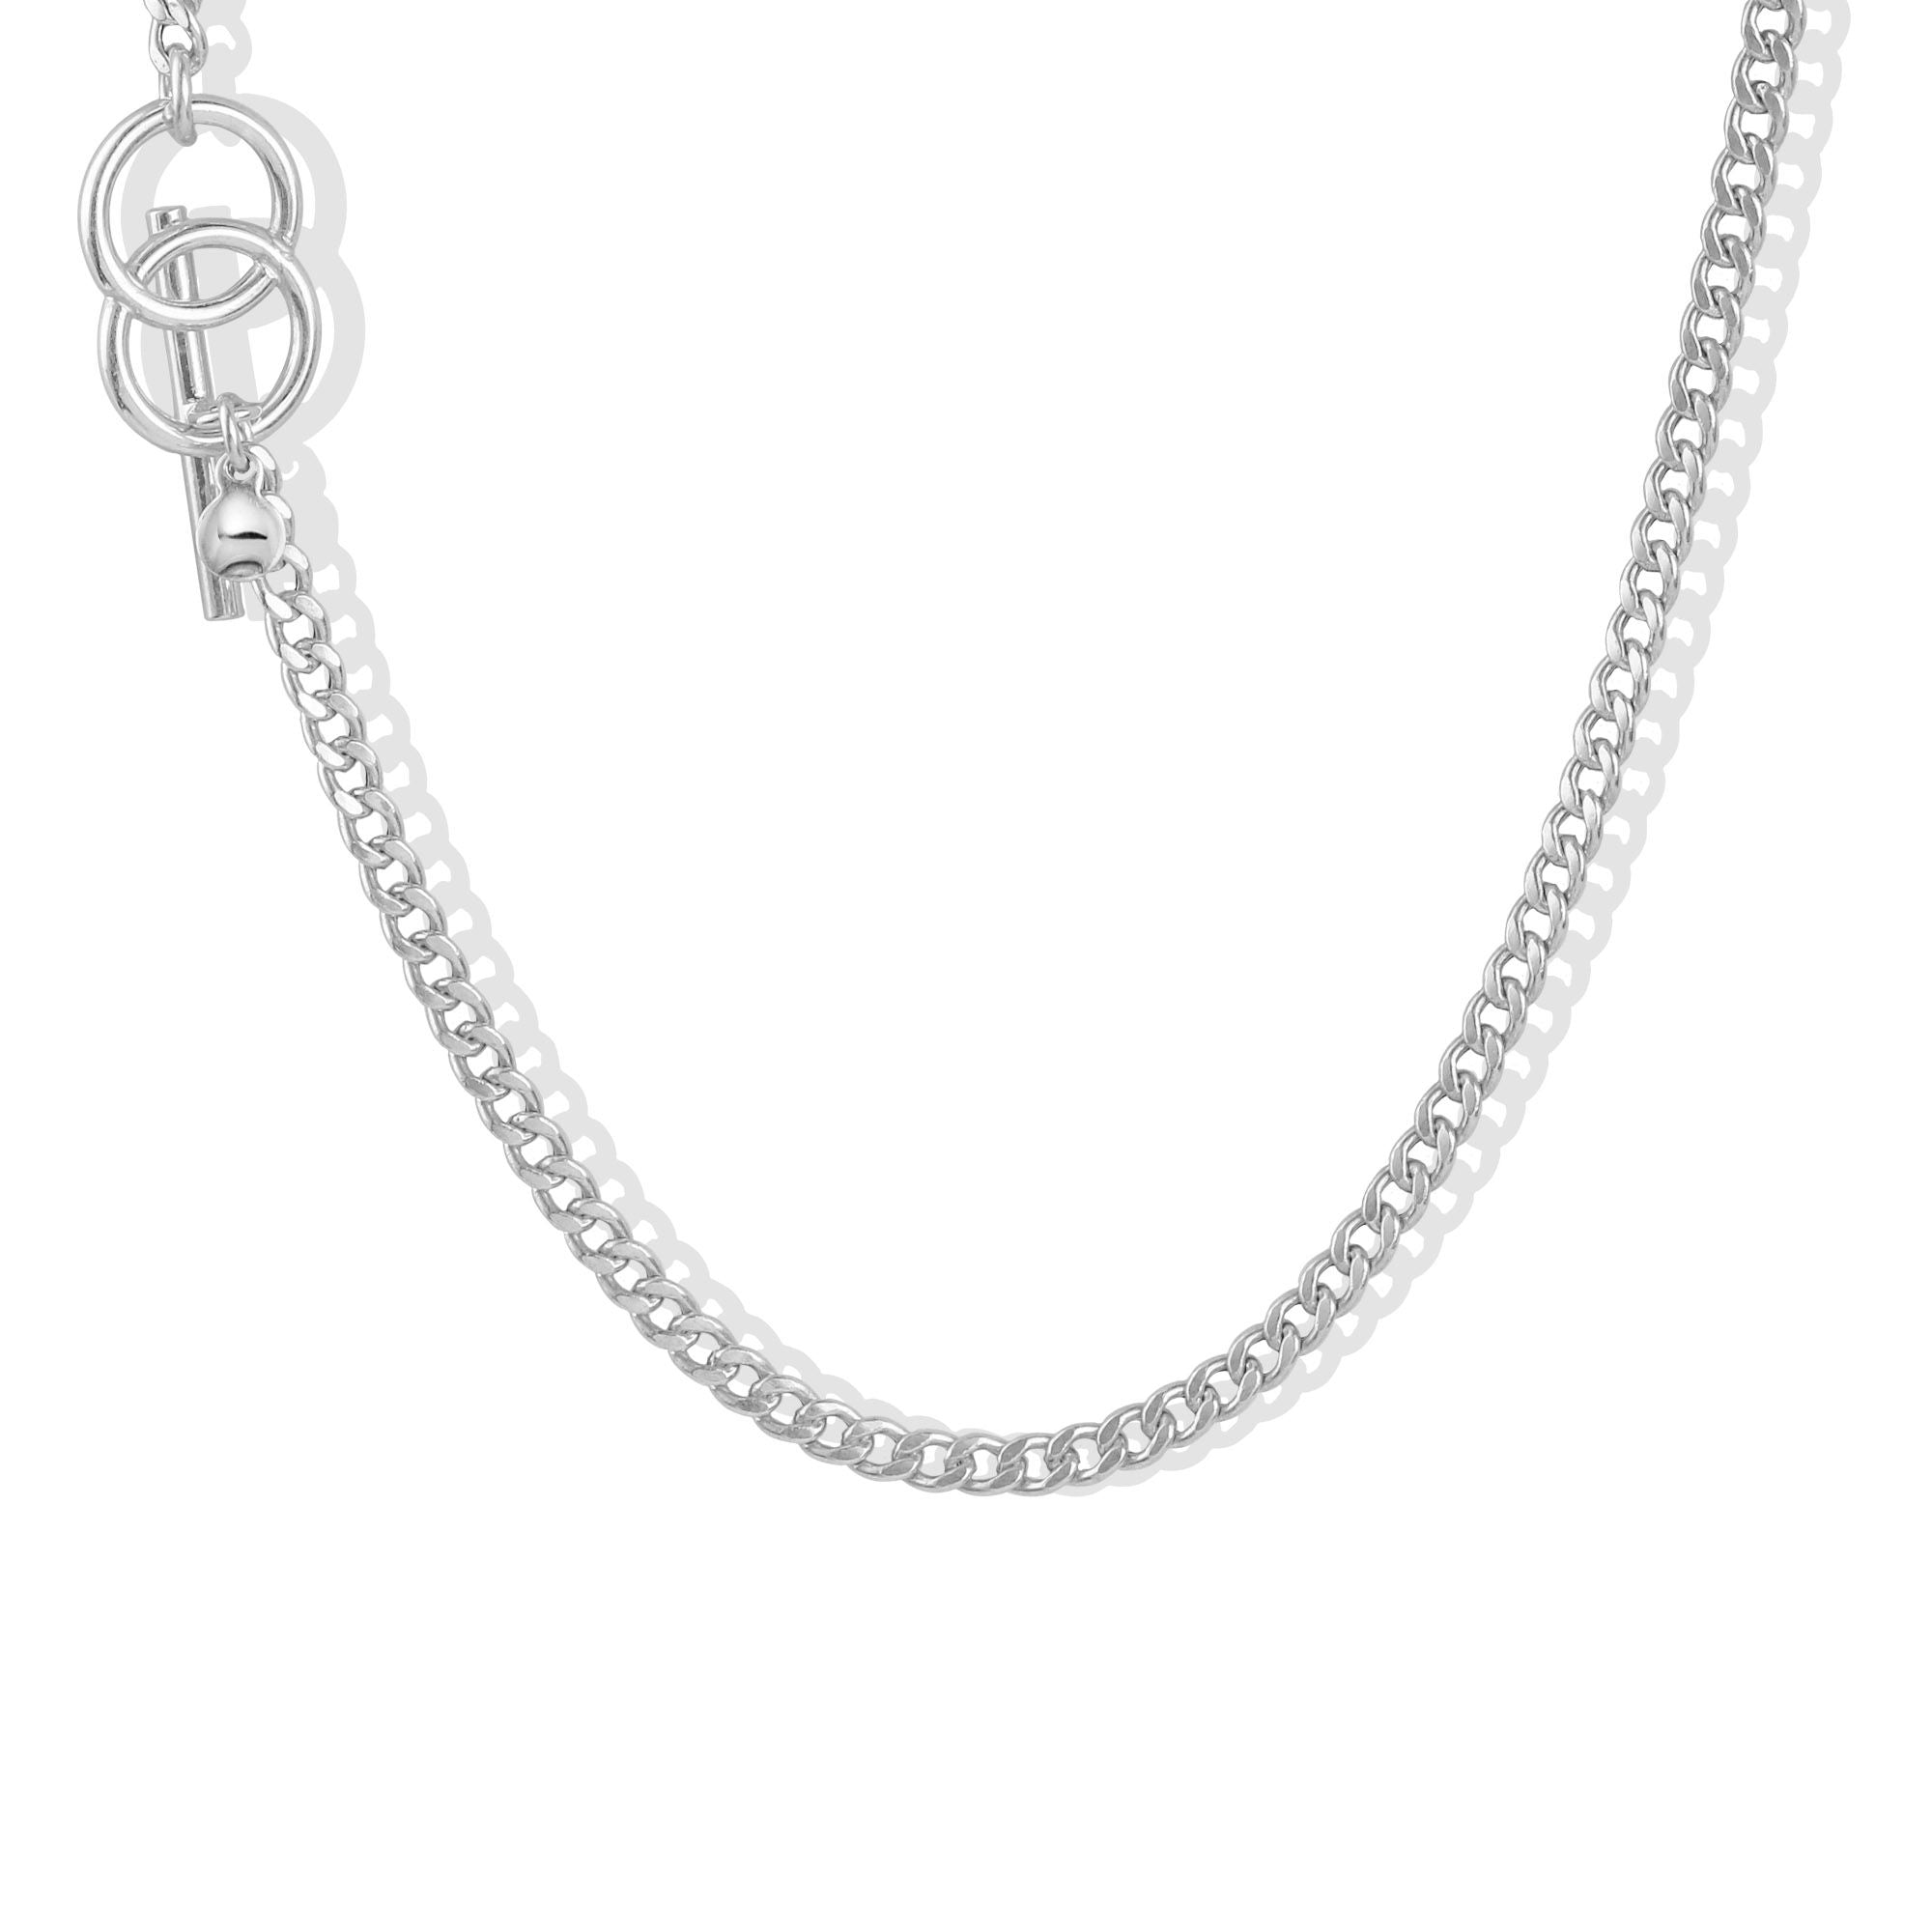 THE ROXE CHAIN NECKLACE